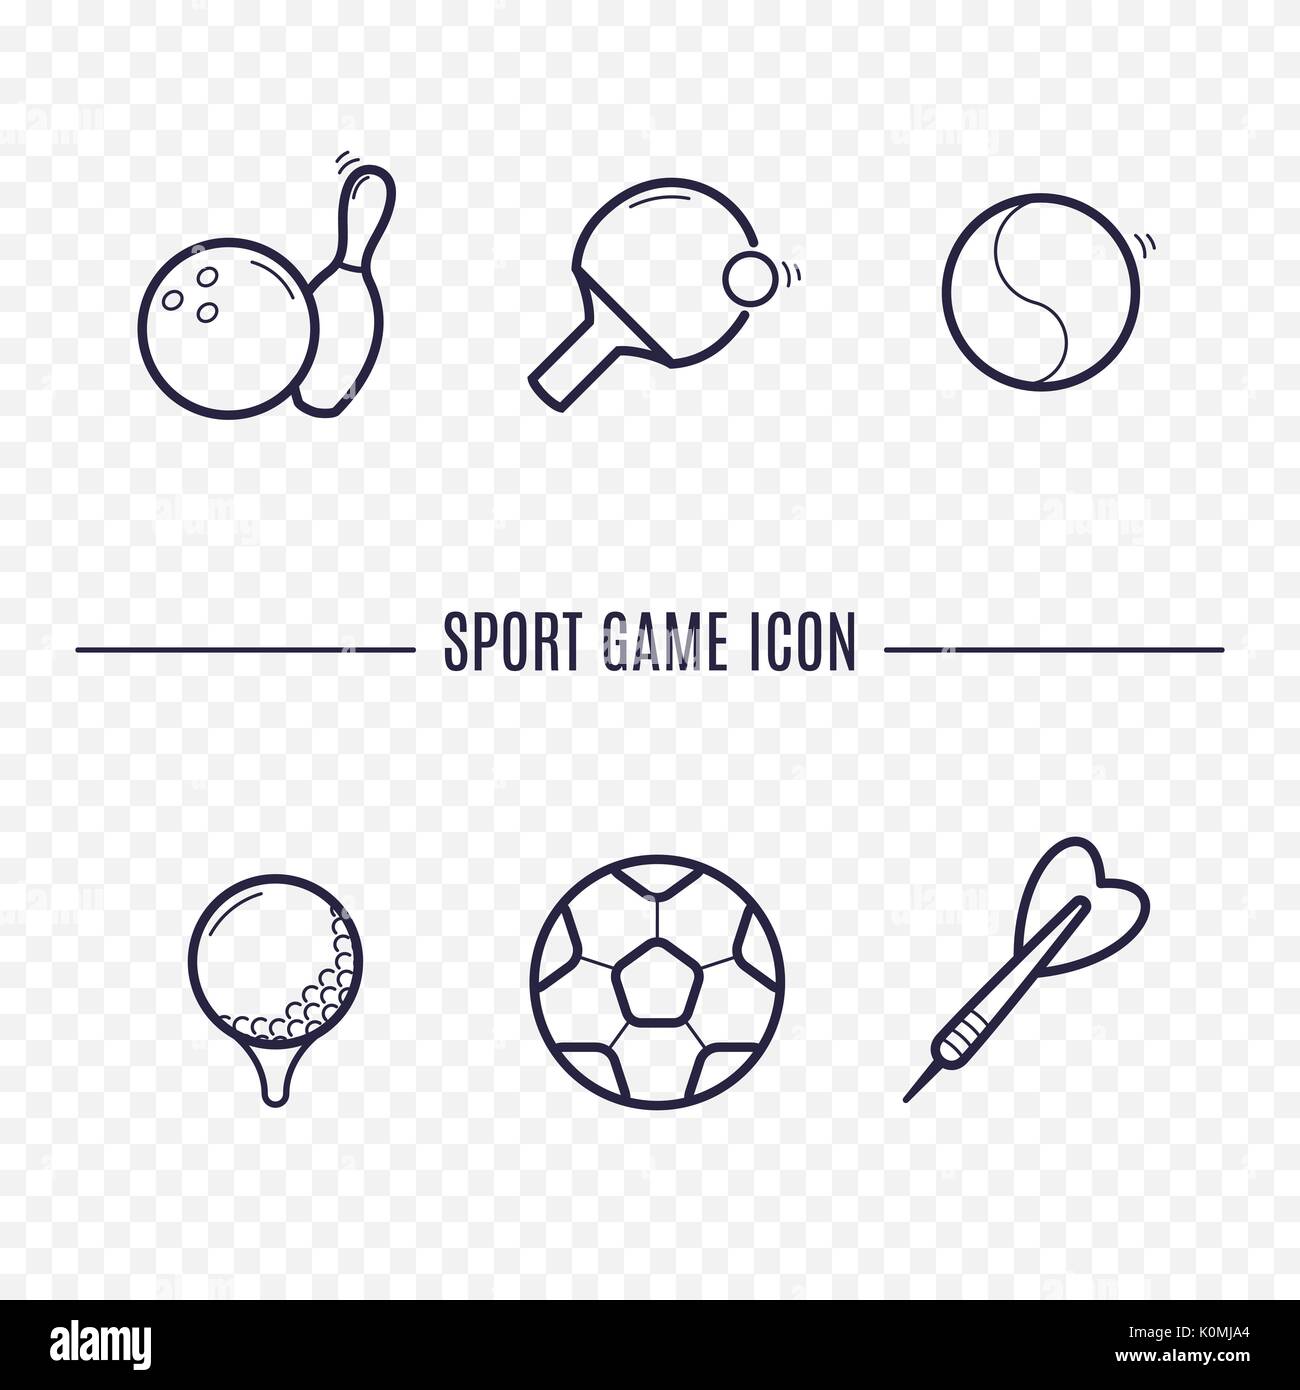 Games linear icons. Chess, dice, cards, checkers and other board games. Game thin linear signs. Outline concept for websites, infographic, mobile applications. Stock Vector